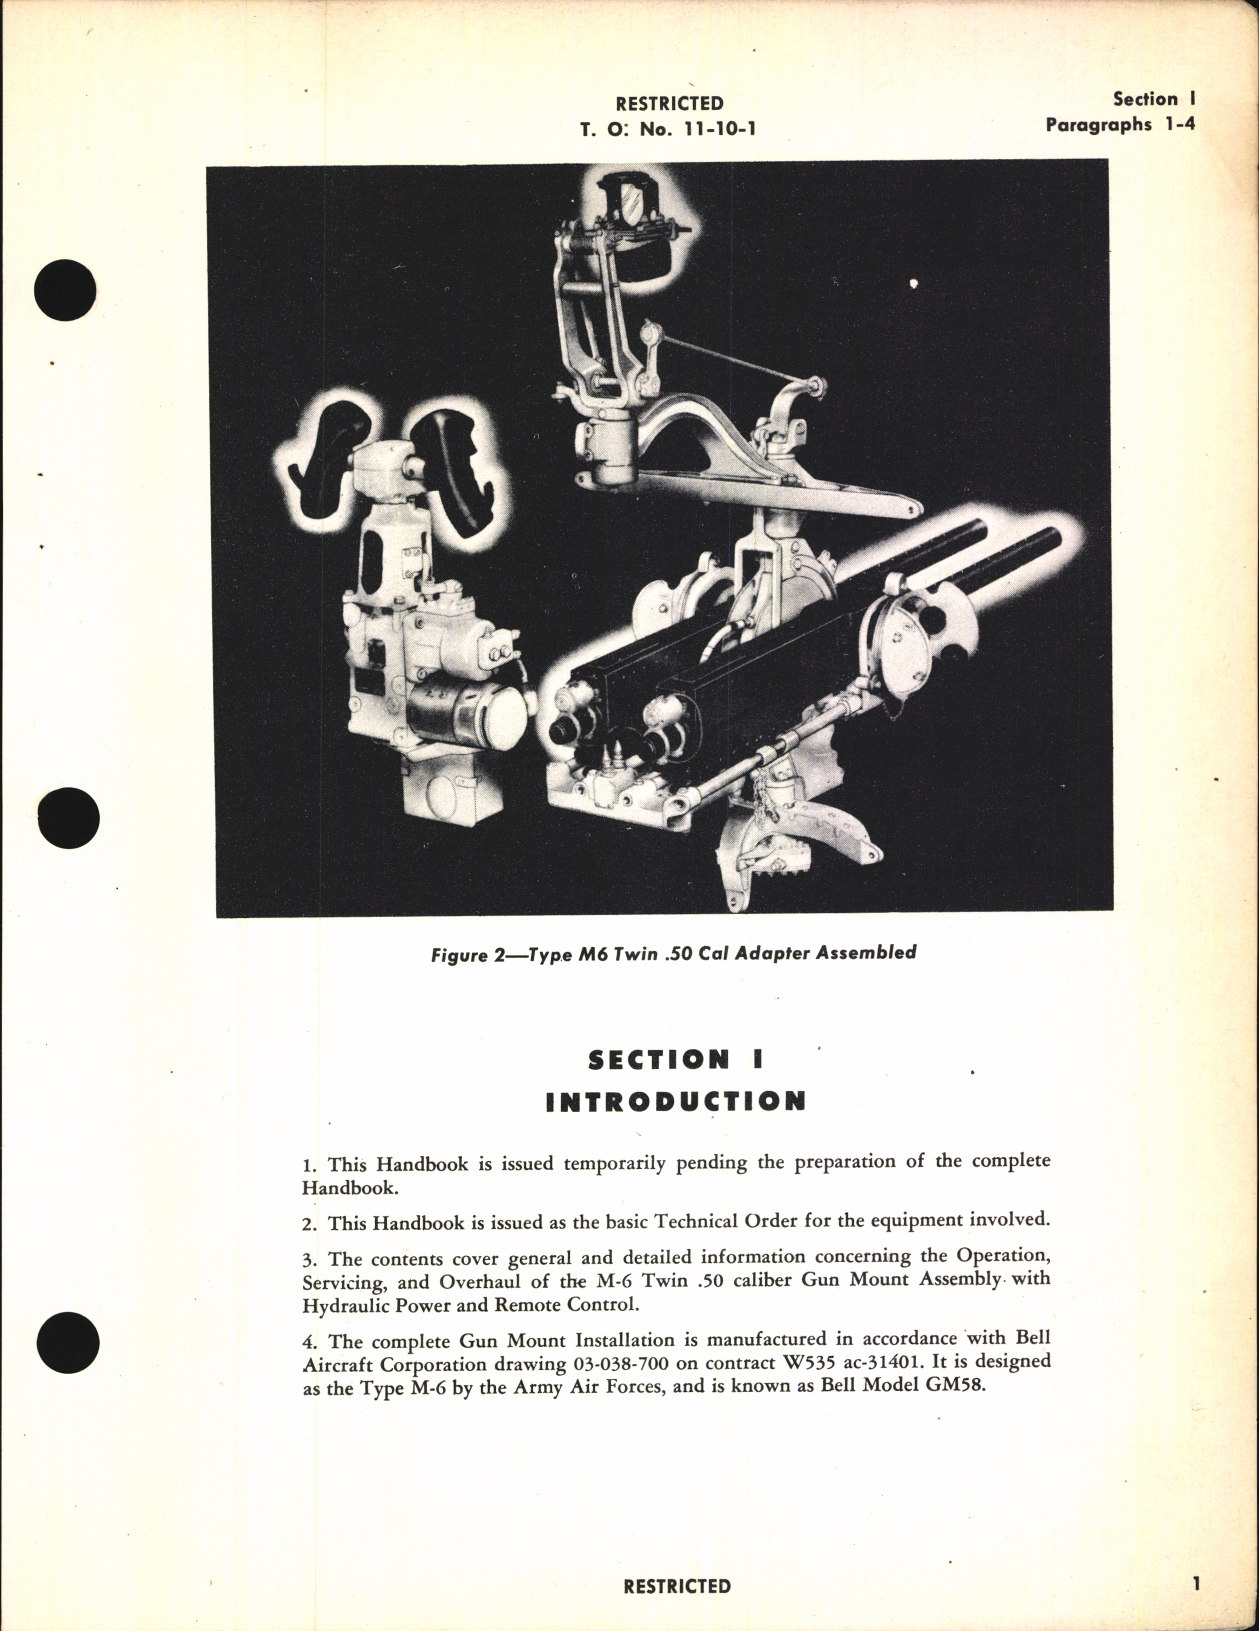 Sample page 5 from AirCorps Library document: Handbook of Instructions with Parts Catalog for Type M-6 Gun Mount Assembly